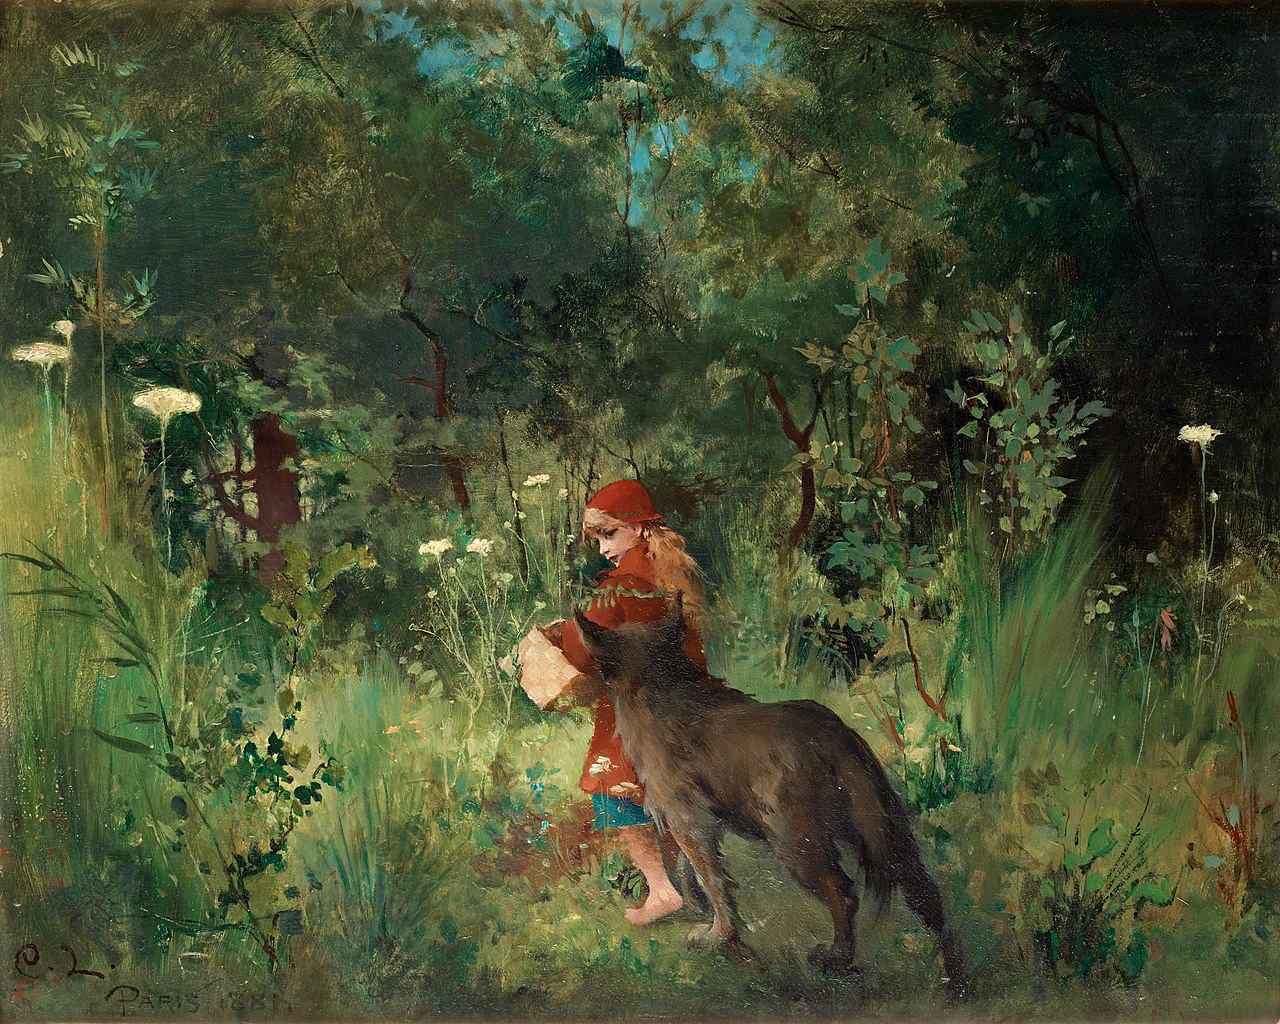 images/Little_Red_Riding_Hood_1881.jpg